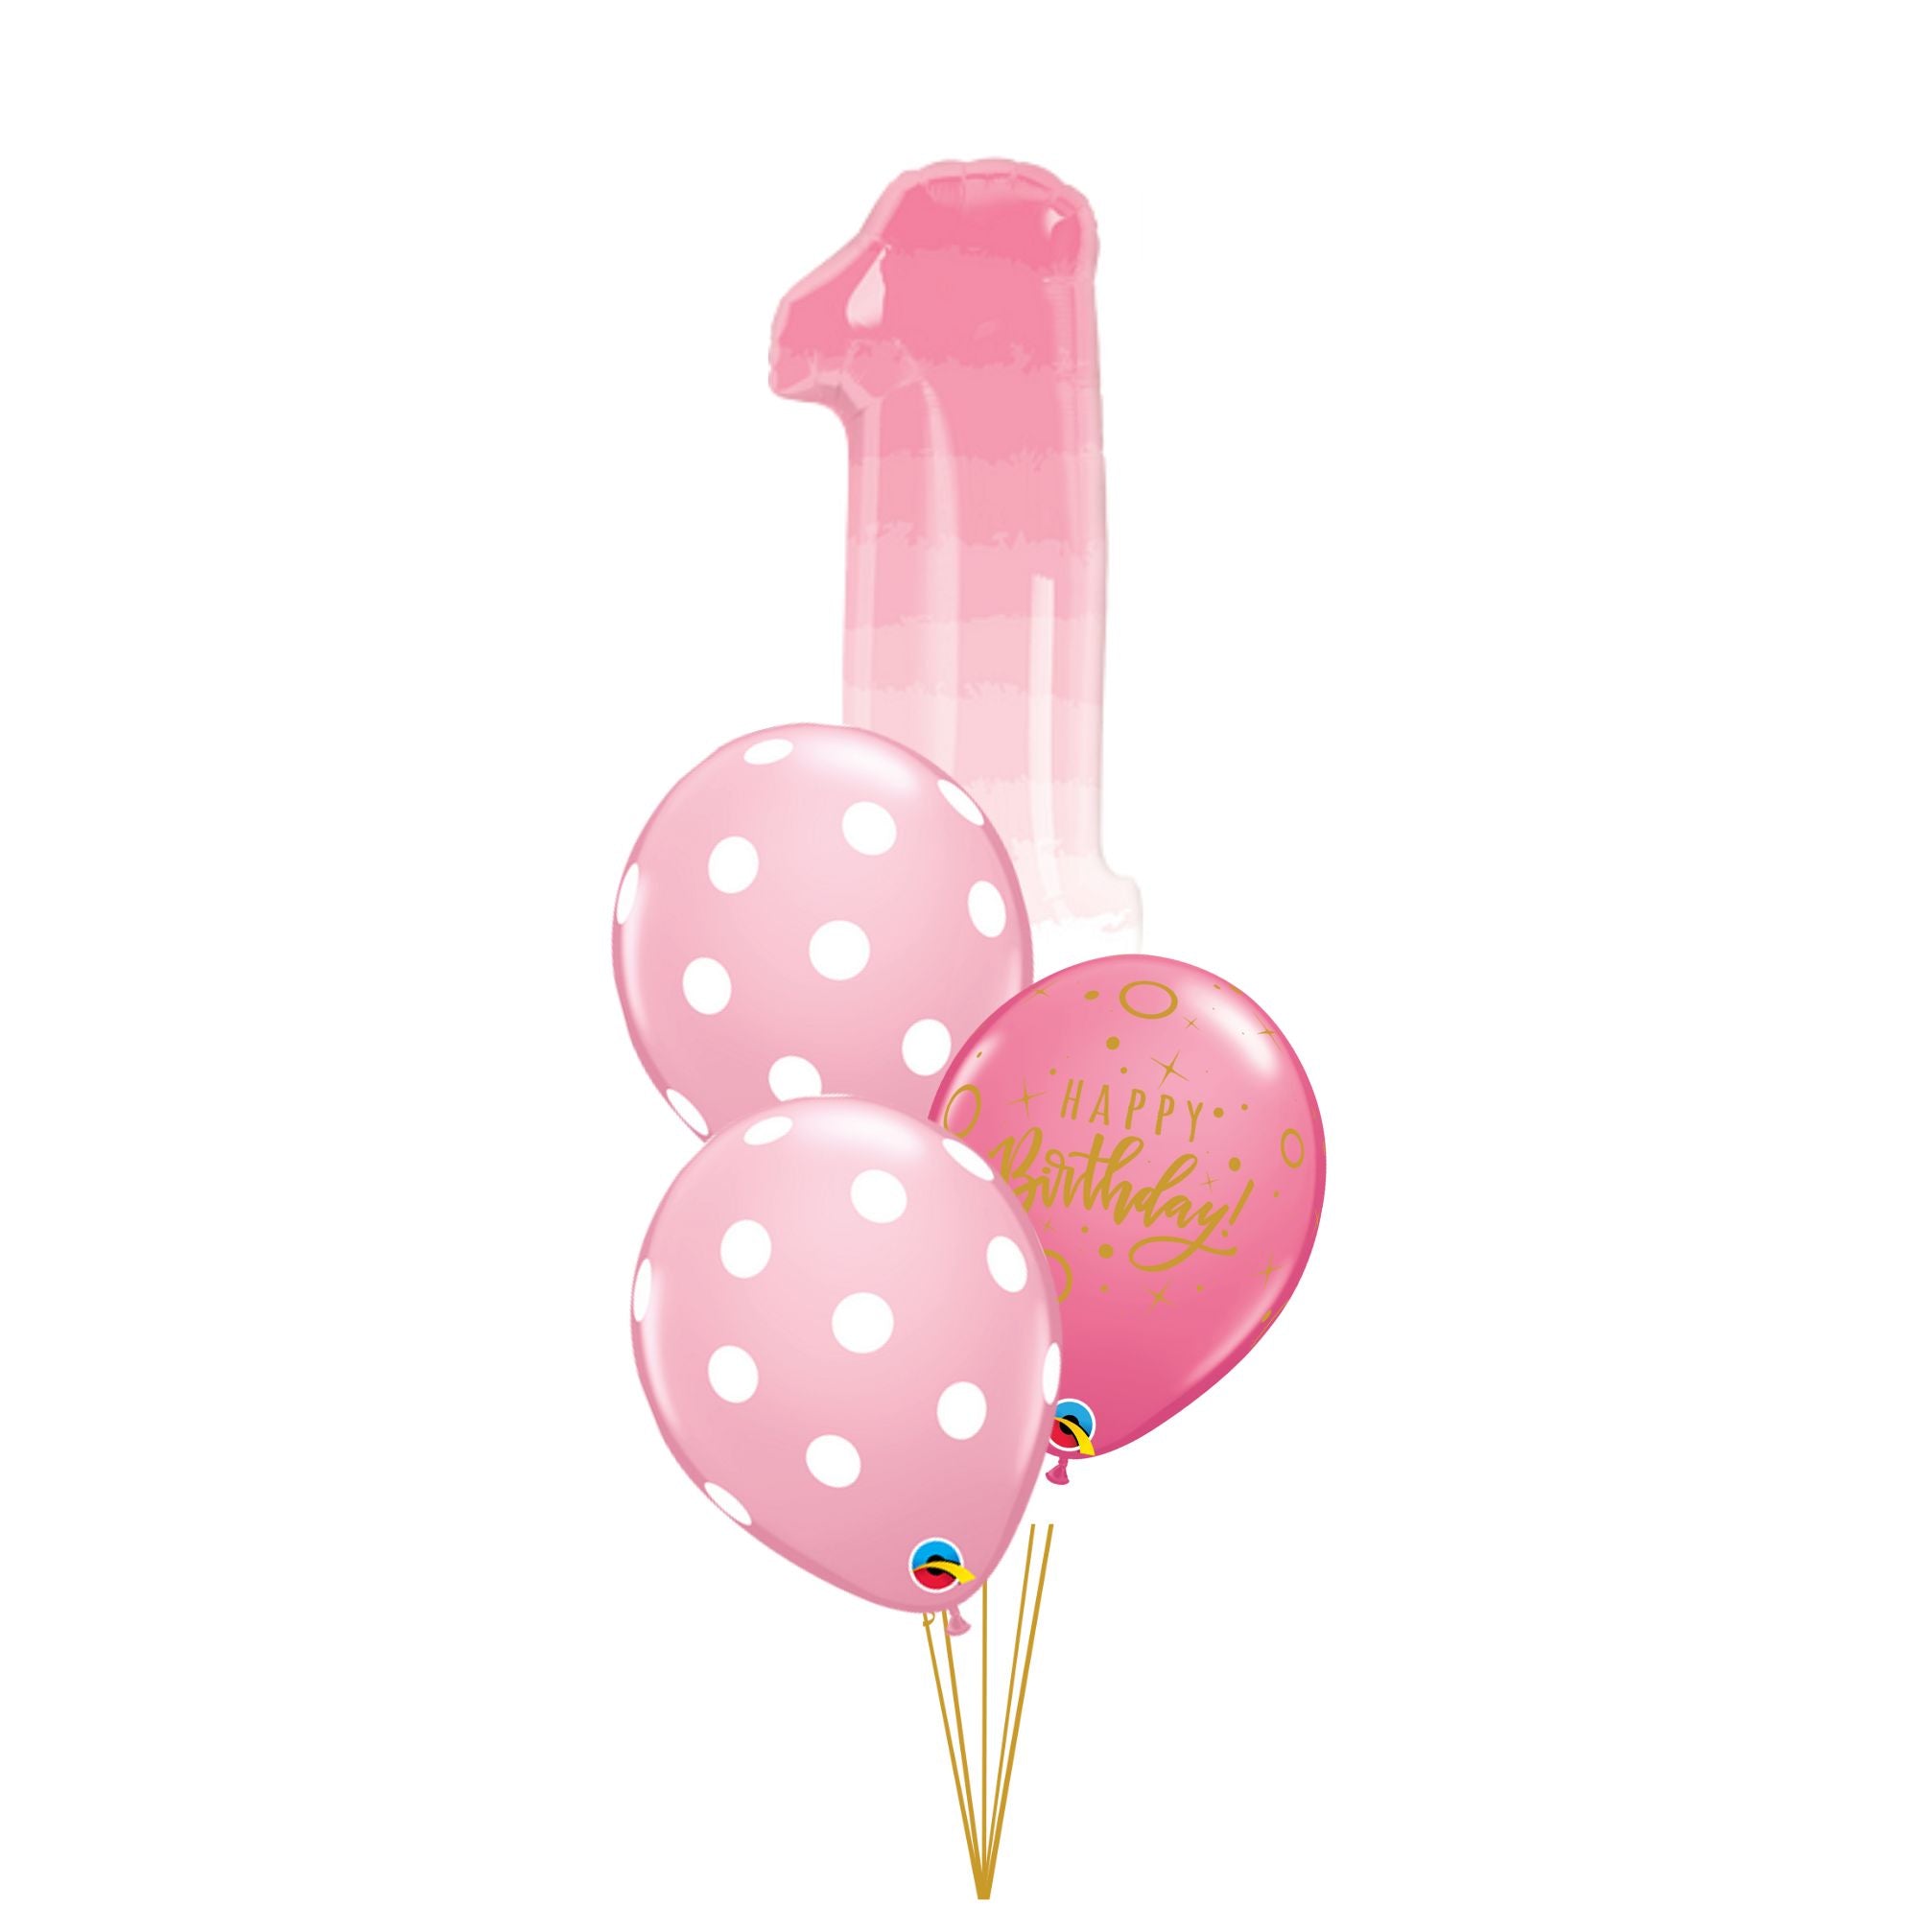 Balloon bouquet combo with one 40" foil number balloon and three regular latex balloons